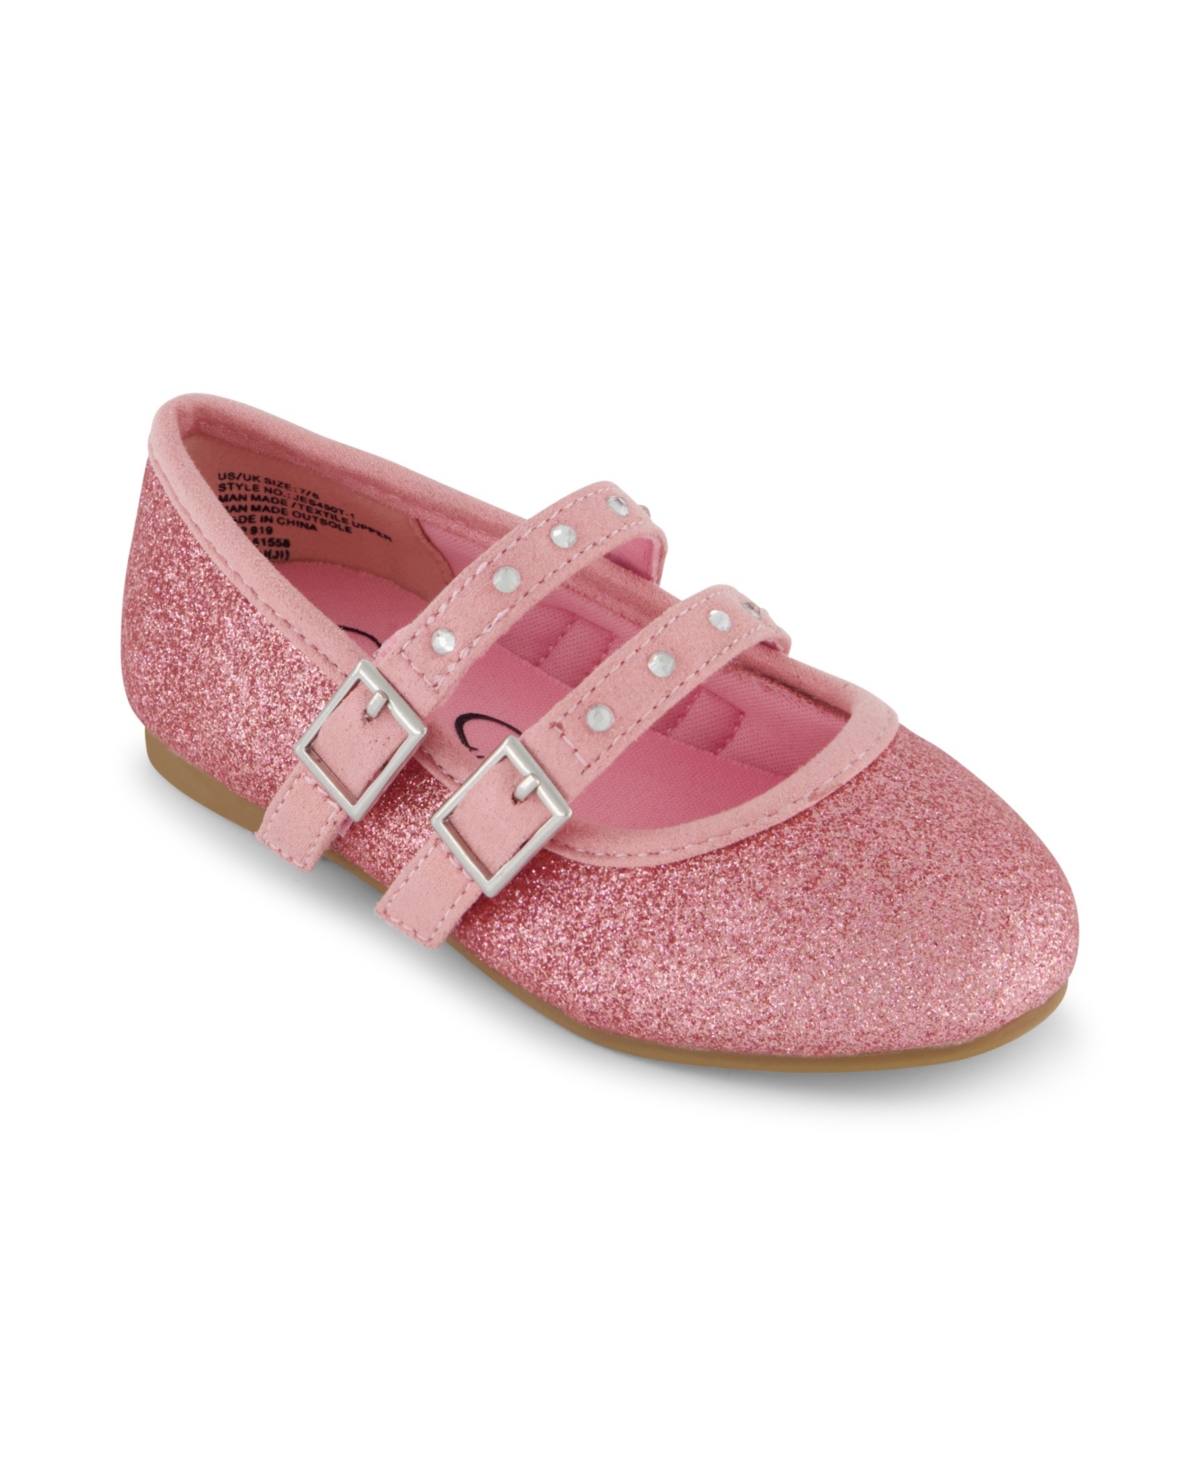 Shop Jessica Simpson Toddler Girls Mary Jane Ballet Flat Shoes In Pink